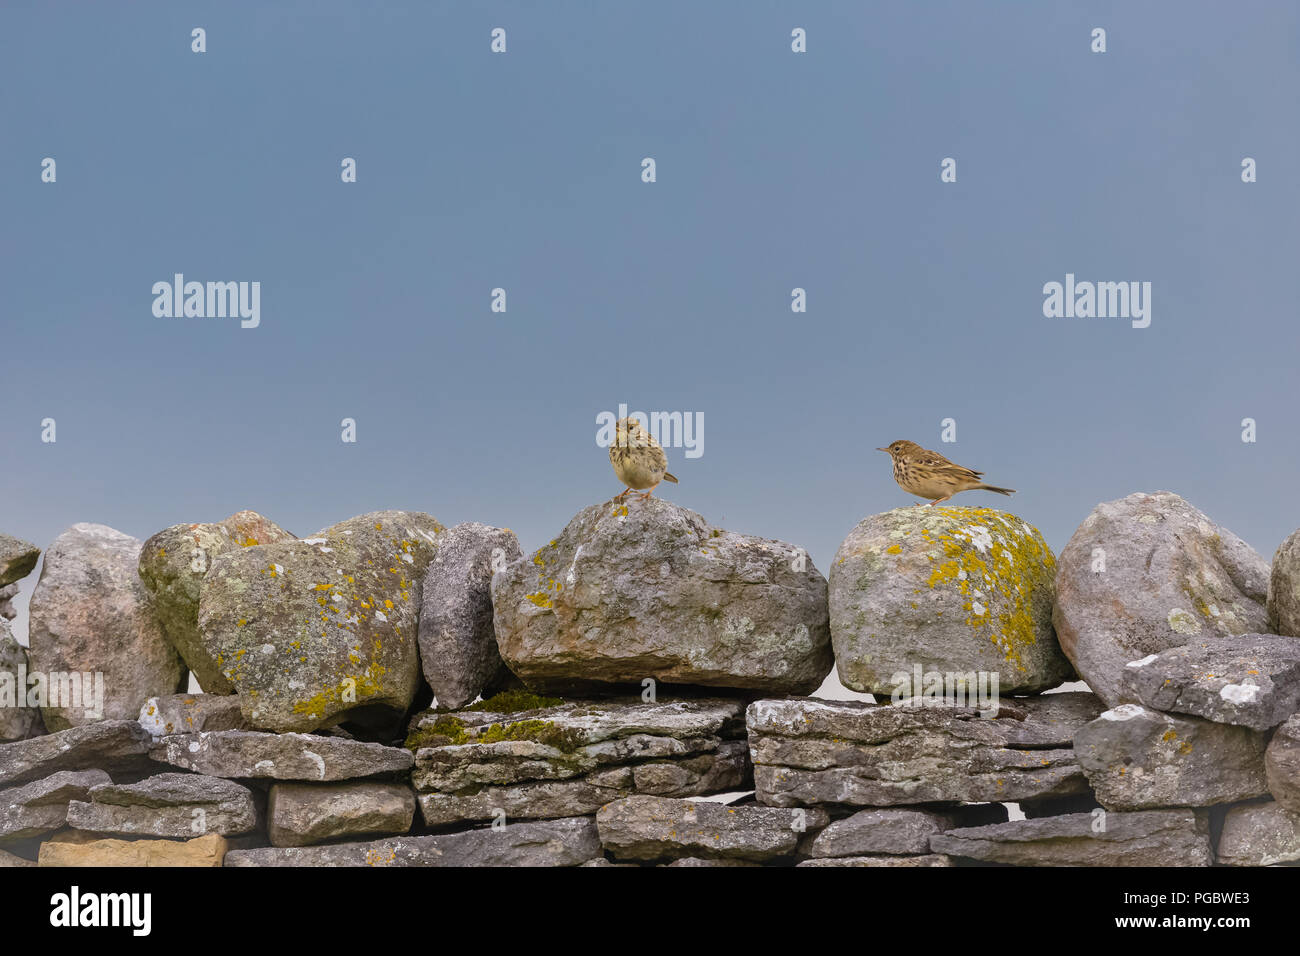 Meadow pipits, two meadow pipits on dry stone walling in the Yorkshire Dales, England.  Scientific name: Anthus pratensis.  Horizontal. Stock Photo